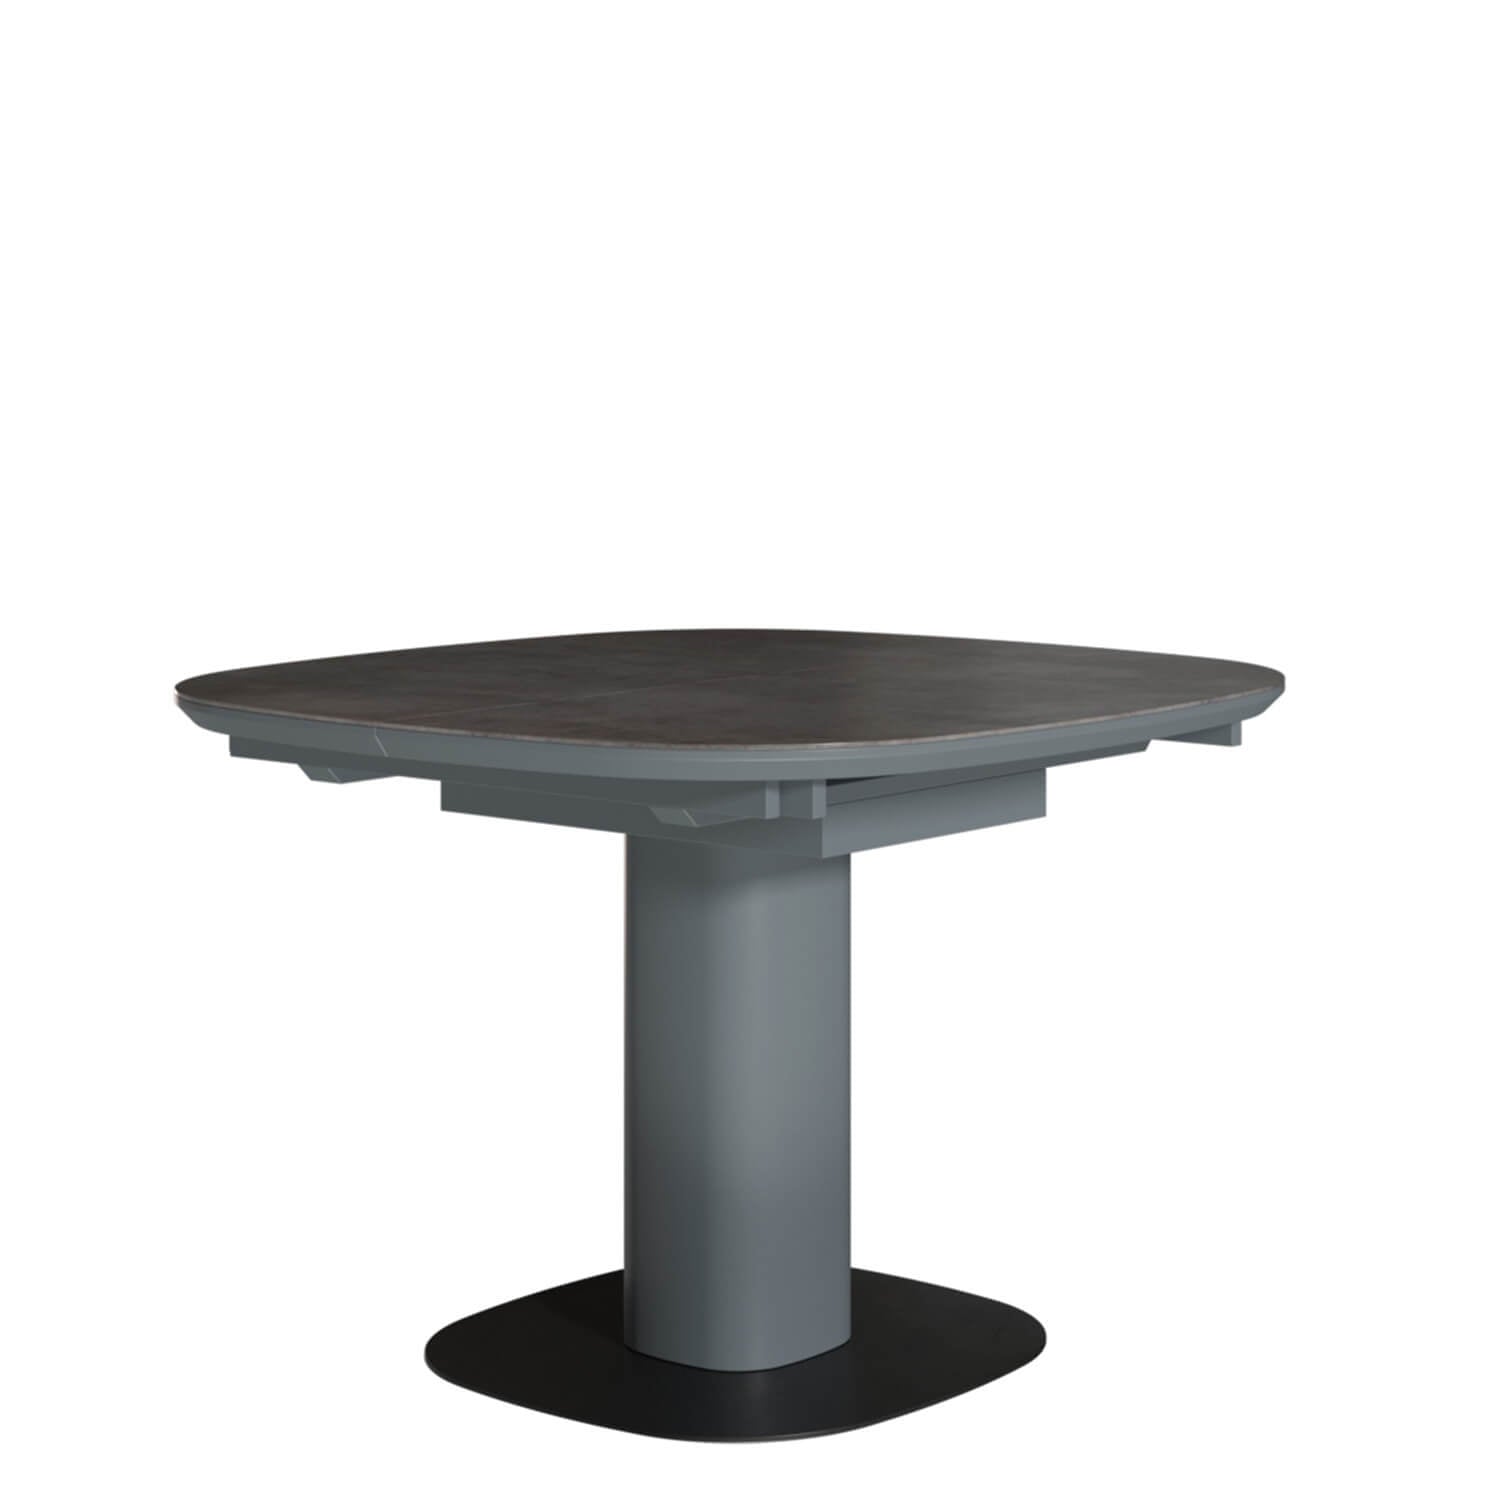 Avola extension dining table